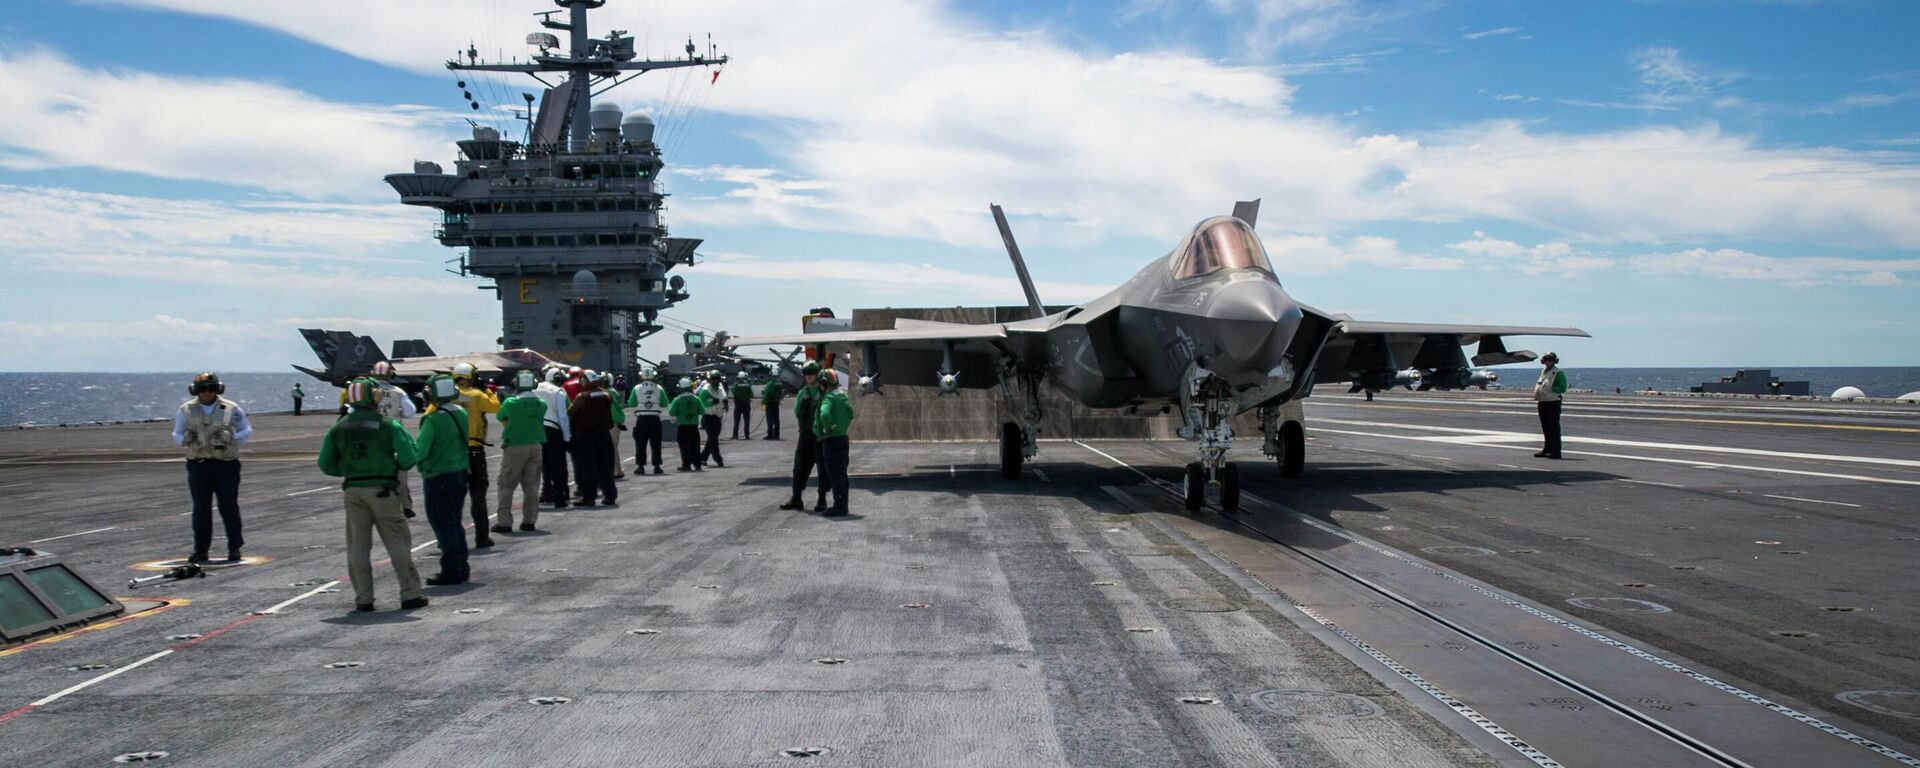 An F-35C Lightning II carrier variant, assigned to the Salty Dogs of Air Test and Evaluation Squadron (VX) 23, waits to launch on the flight deck of the aircraft carrier USS George Washington (CVN 73). VX-23 is conducting its third and final developmental test (DT-III) phase aboard George Washington in the Atlantic Ocean. The F-35C is expected to be Fleet operational in 2018.  - Sputnik International, 1920, 05.01.2024